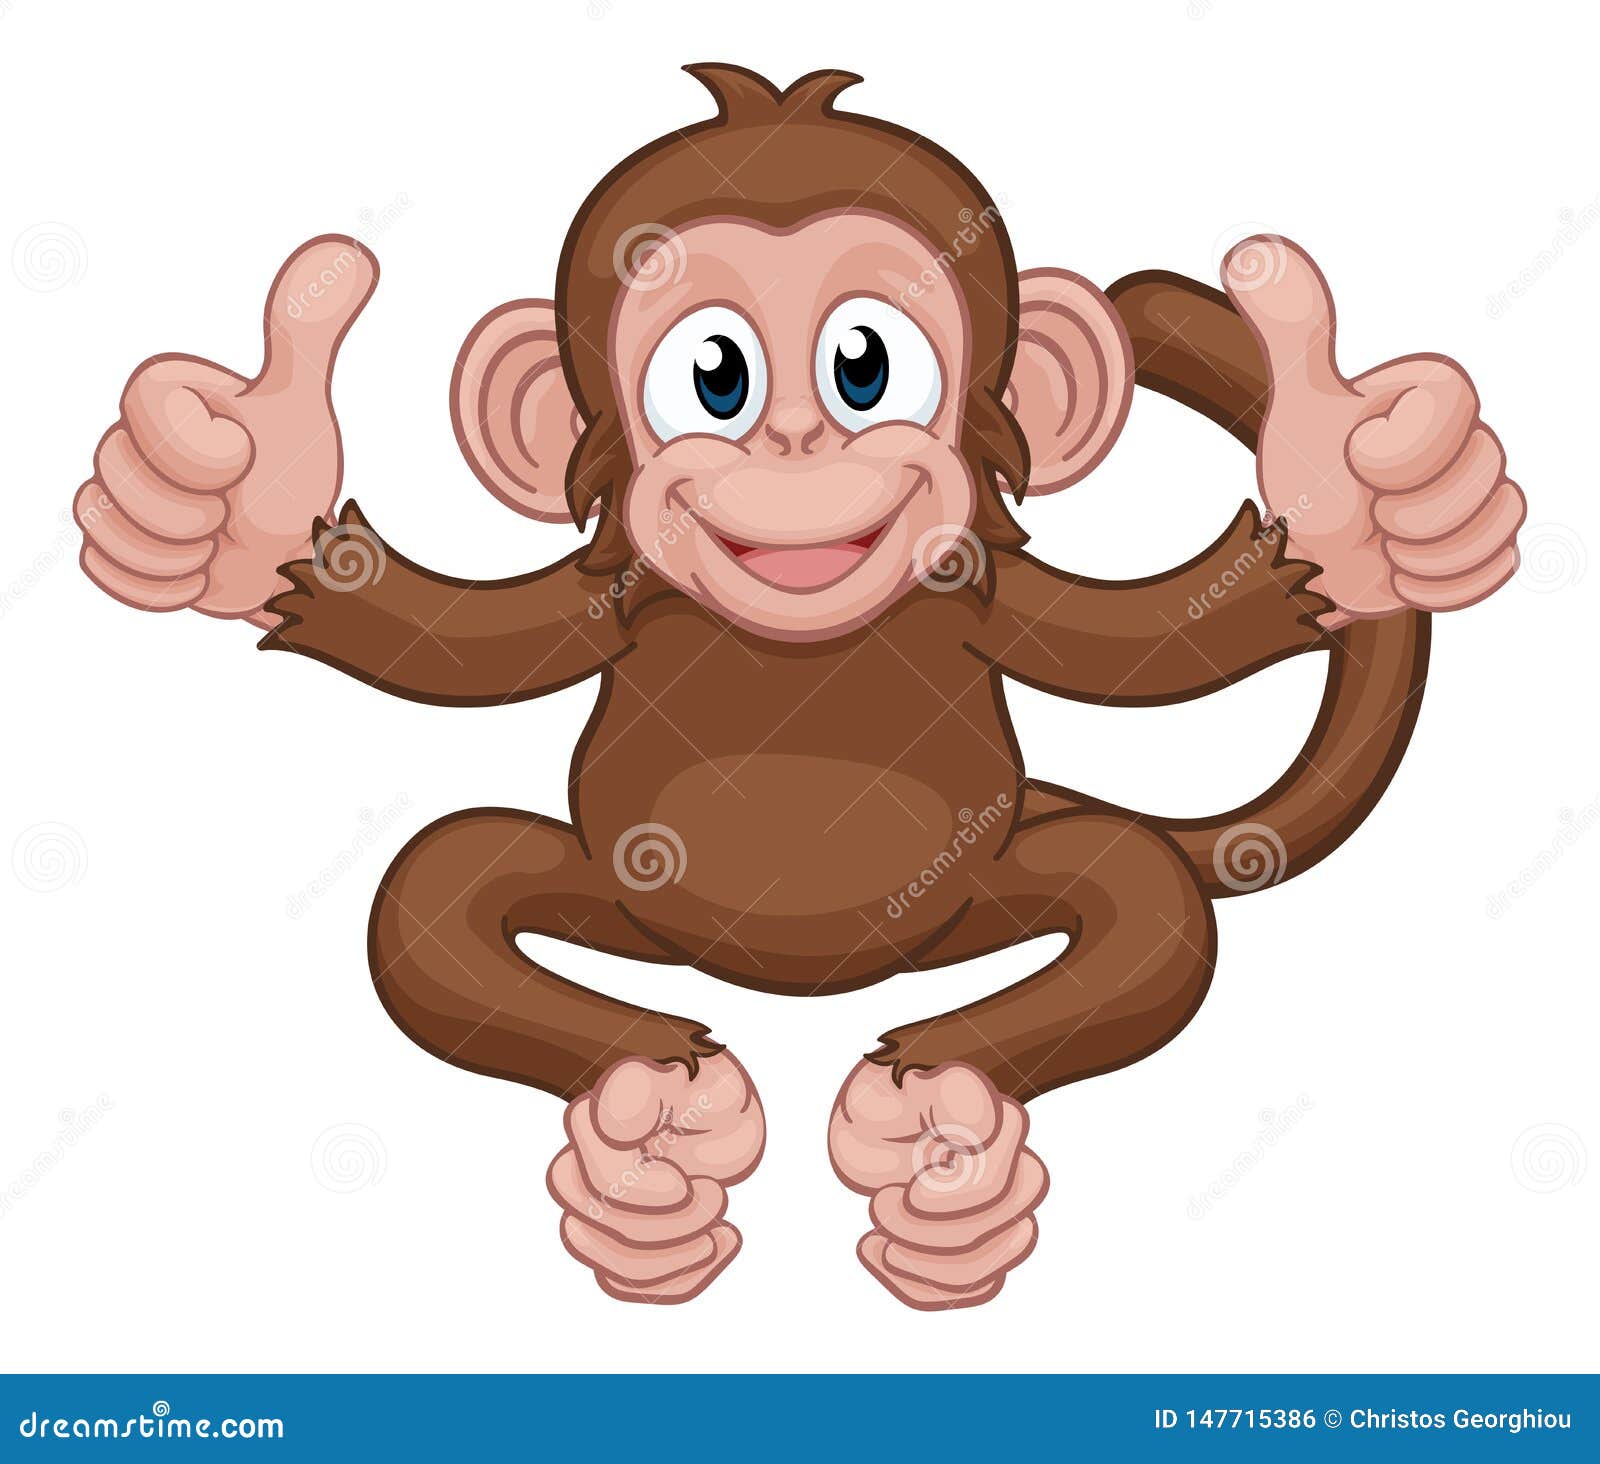 Monkey Cartoon Animal Giving Double Thumbs Up Stock Vector - Illustration  of board, characters: 147715386